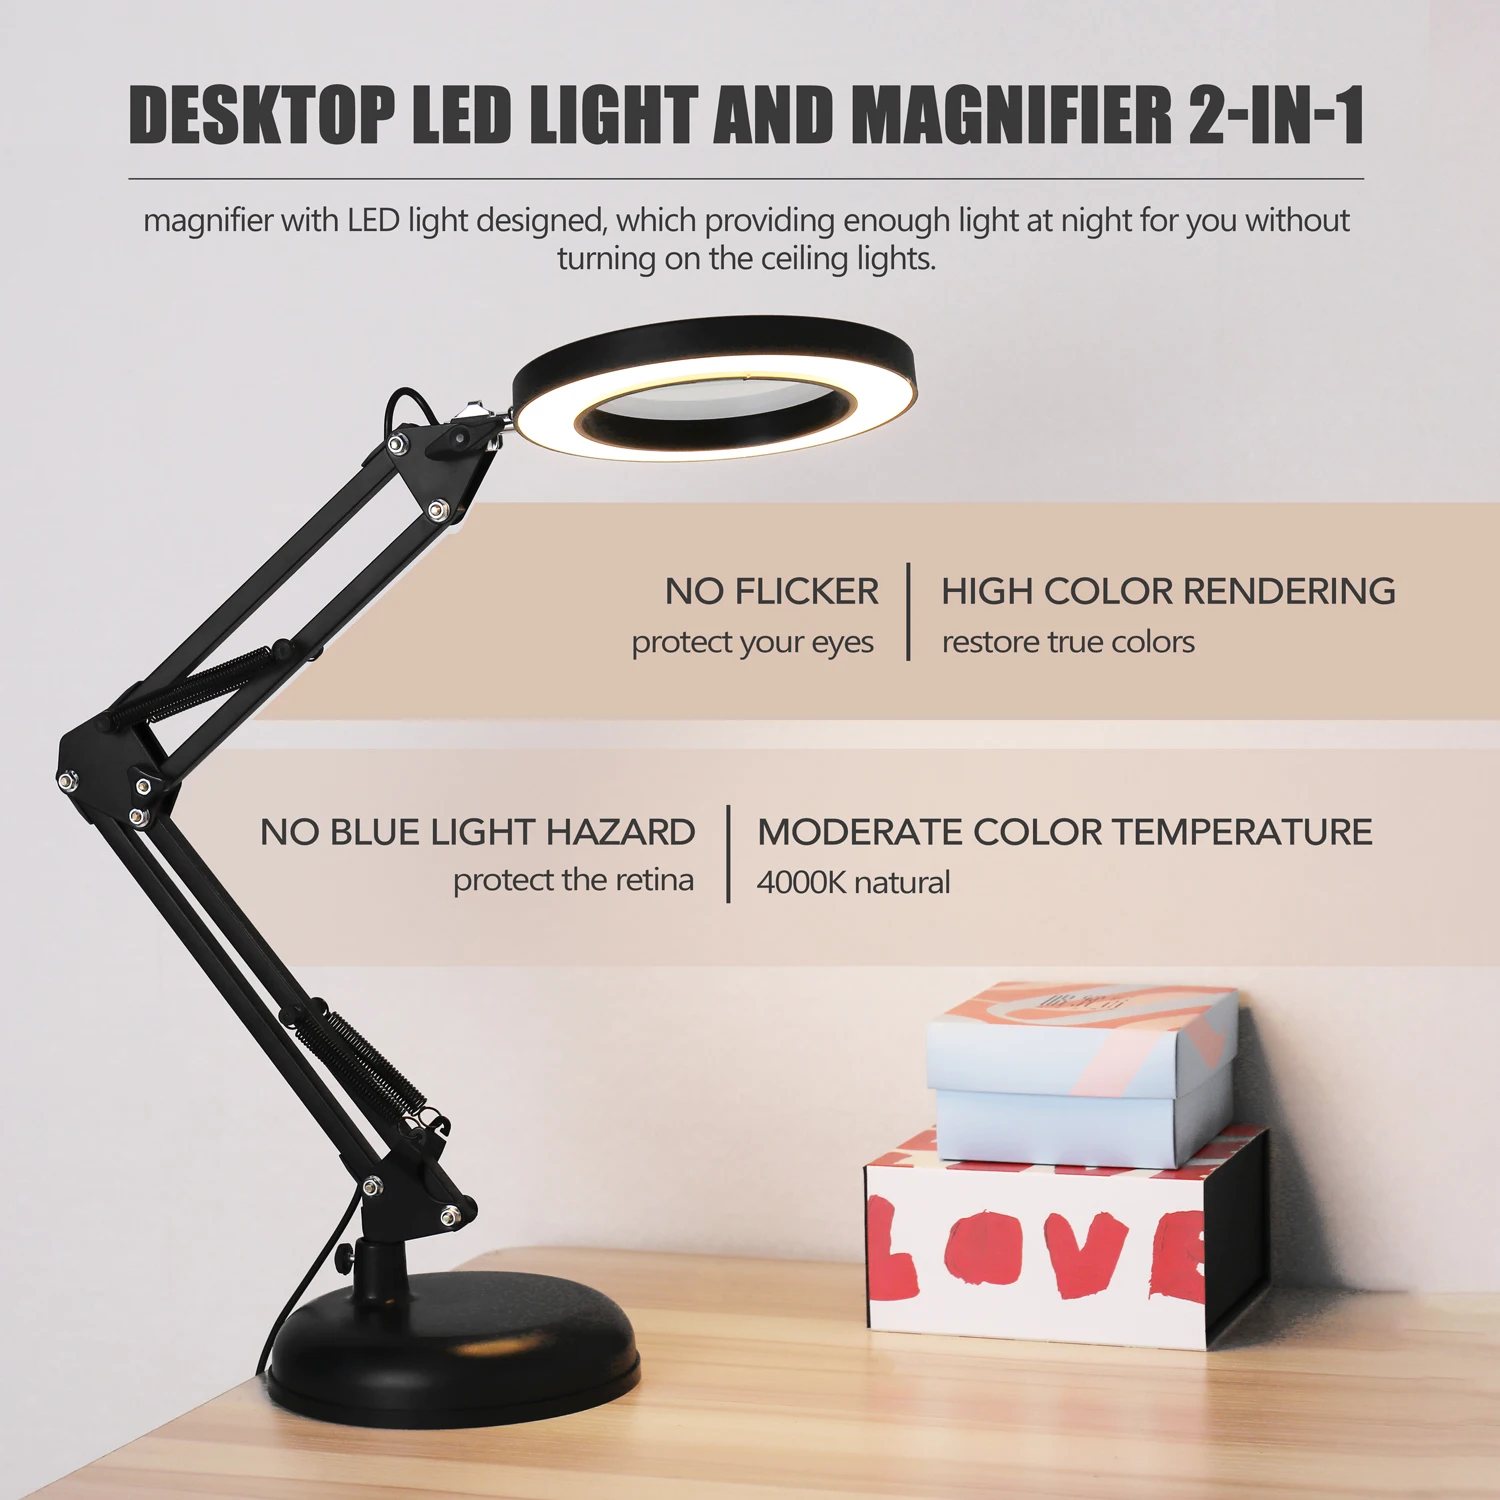 KKMOON Professional 5X Magnifying Glass Desk Lamp Magnifier LED Light Foldable Reading Lamp Magnifier USB Power Supply Magnifier